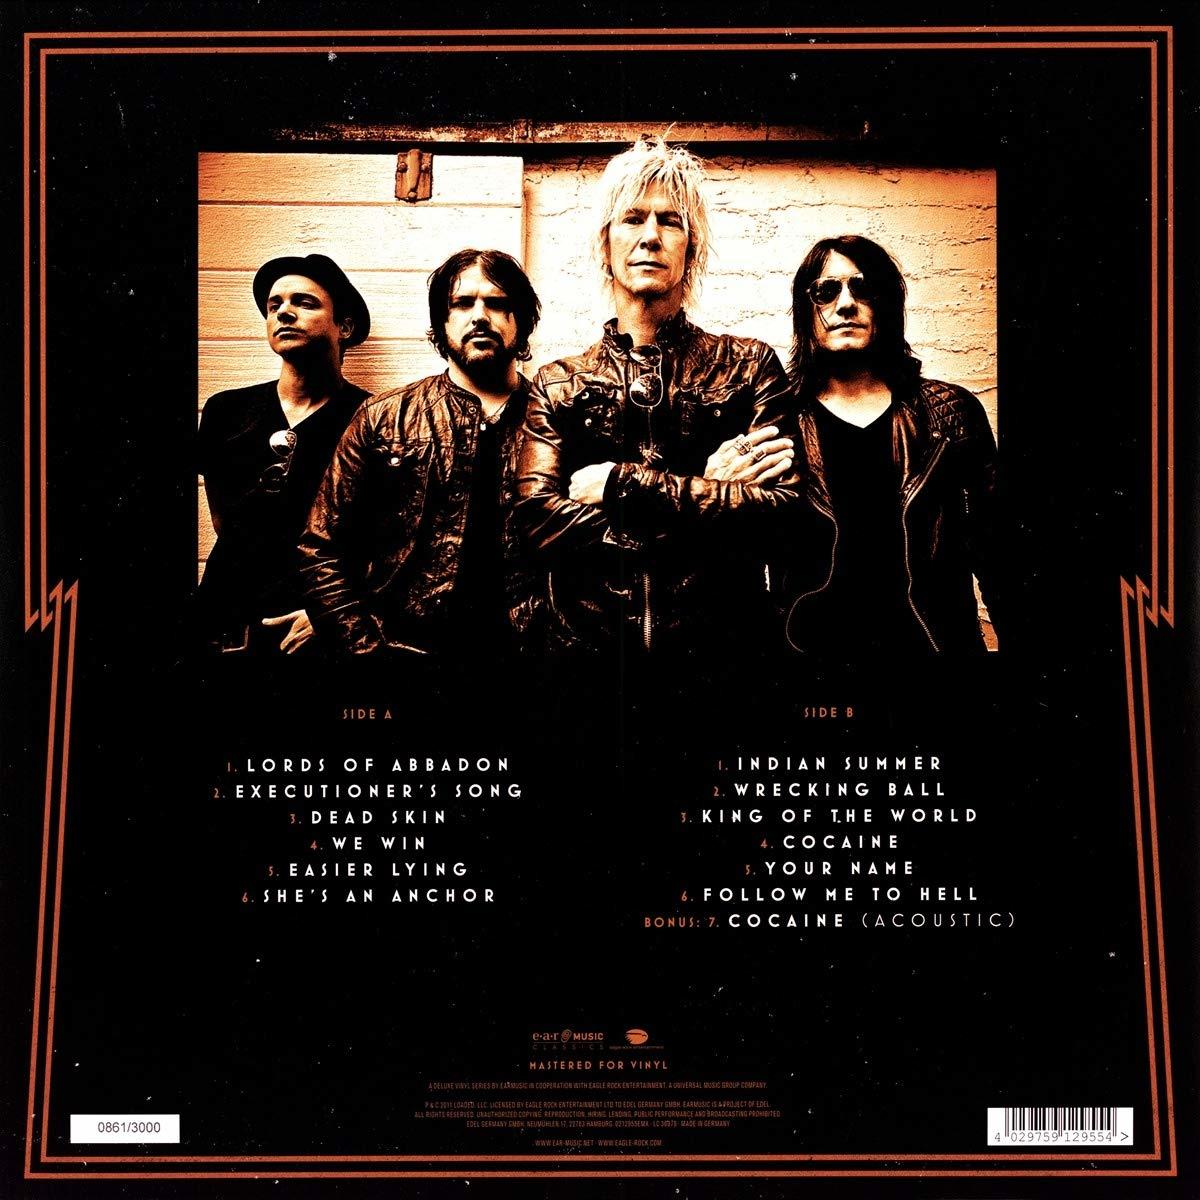 Taking (Vinyl) The Mckagan\'s - LP+CD) Loaded (Limited - Duff